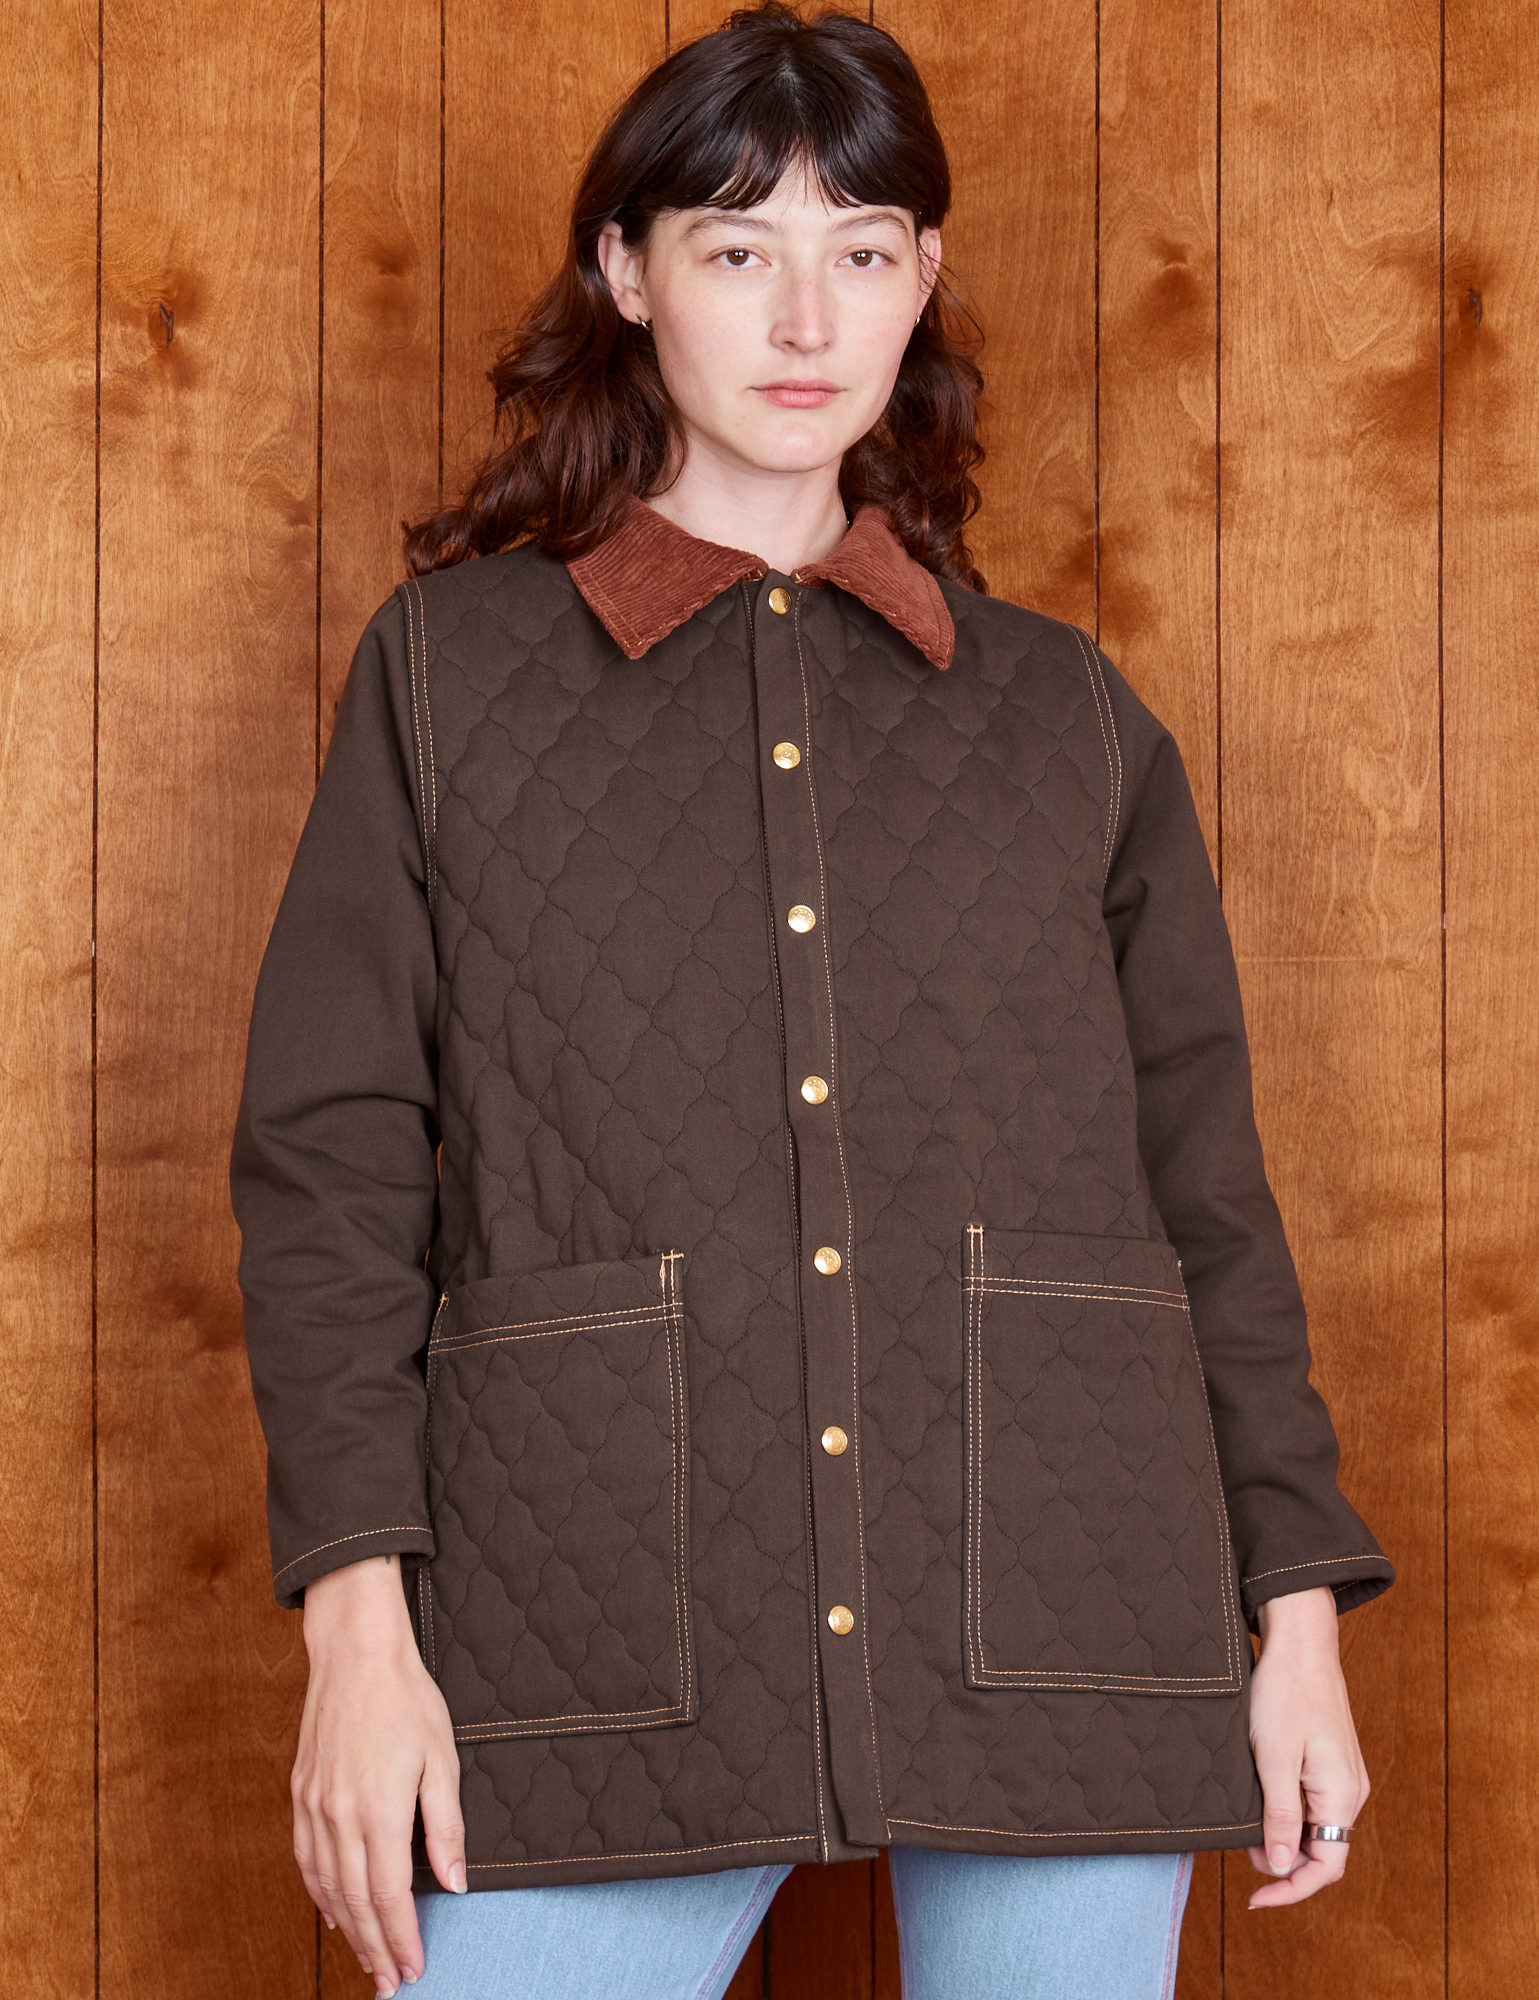 Alex is 5'8" and wearing P Quilted Overcoat in Espresso Brown